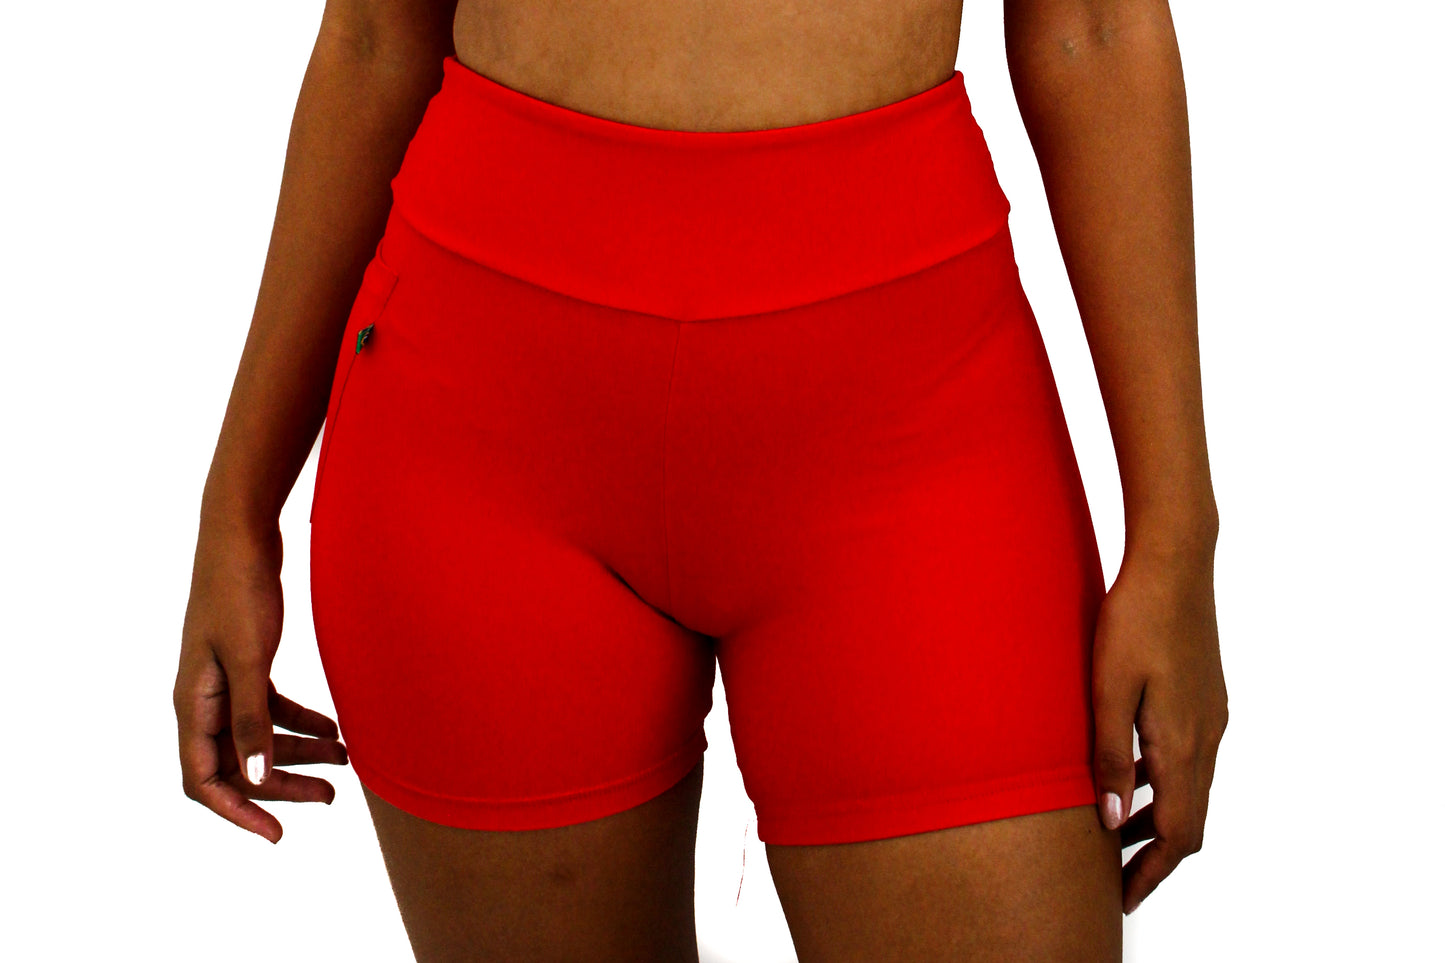 Red Classic Shorts 4" long high waist - Eco Free biodegradable